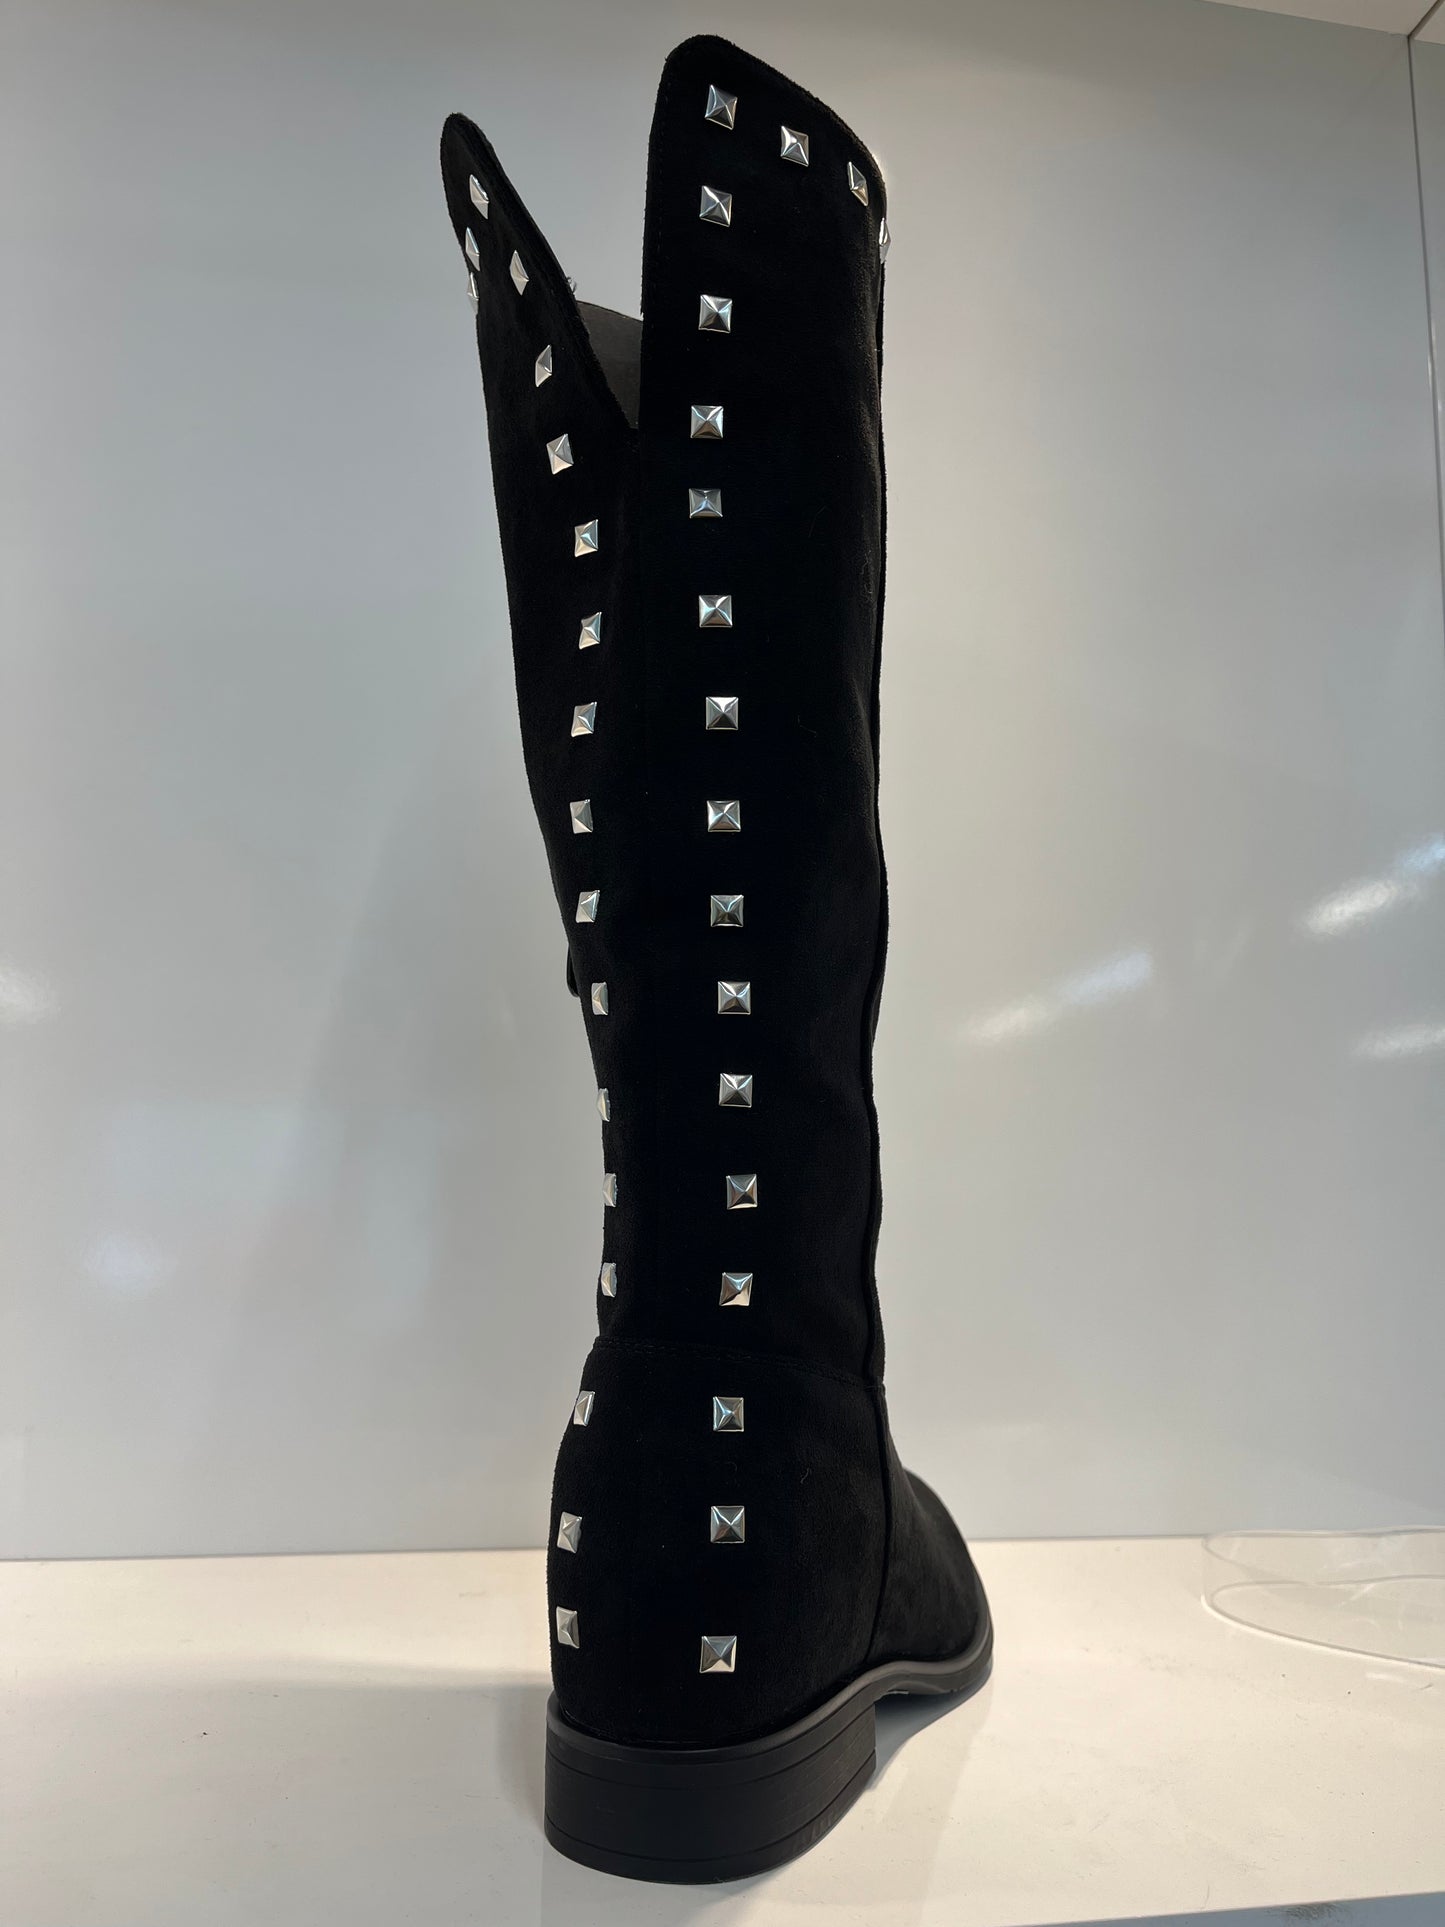 BLACK SILVER STUD KNEE HIGH BOOTS